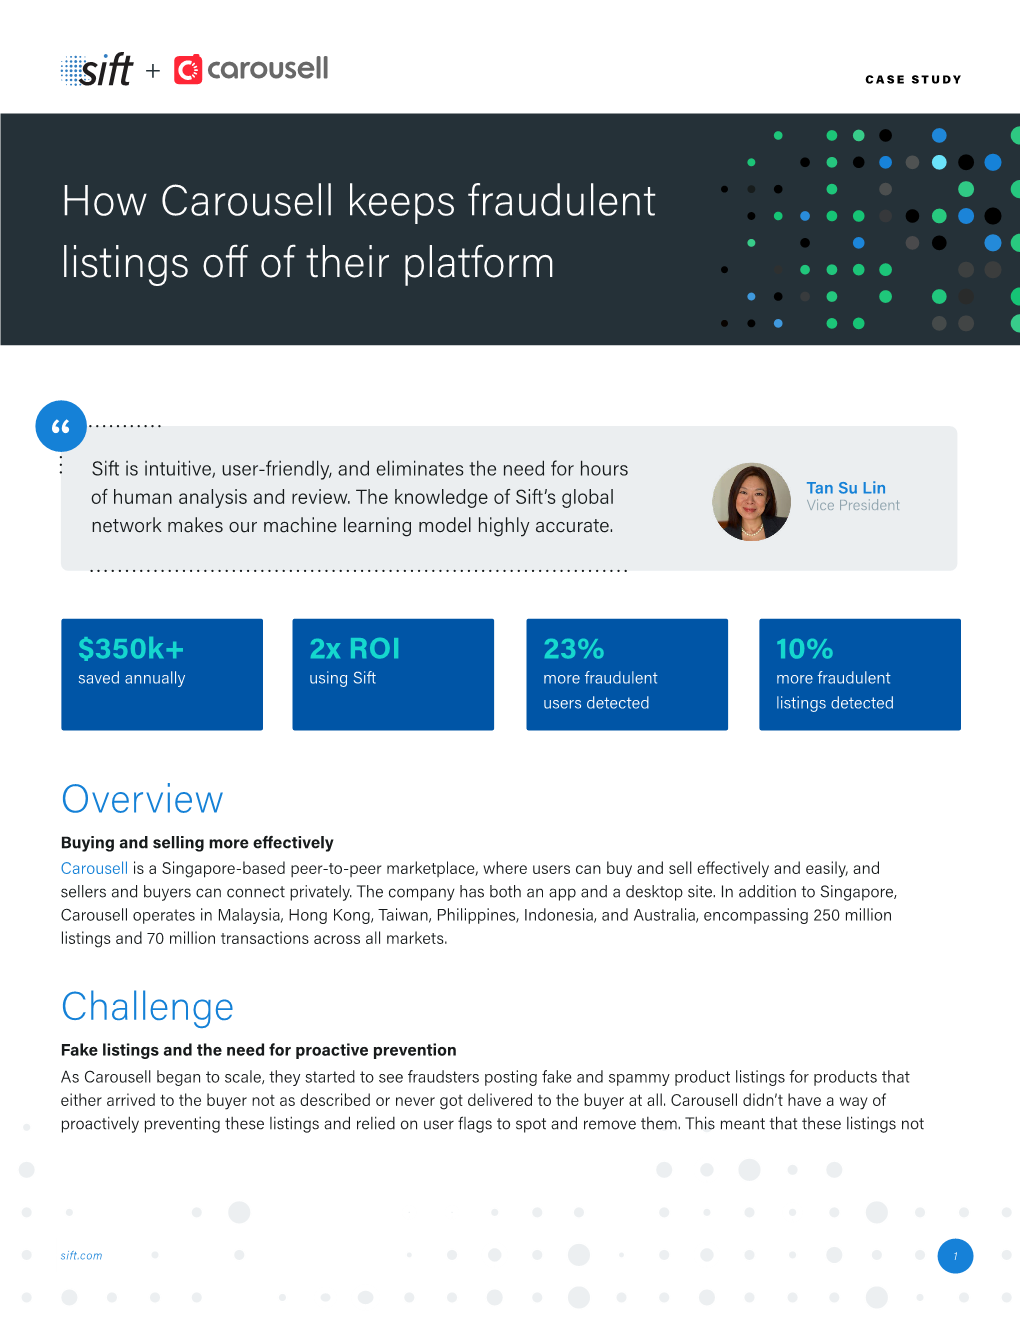 How Carousell Keeps Fraudulent Listings Off of Their Platform